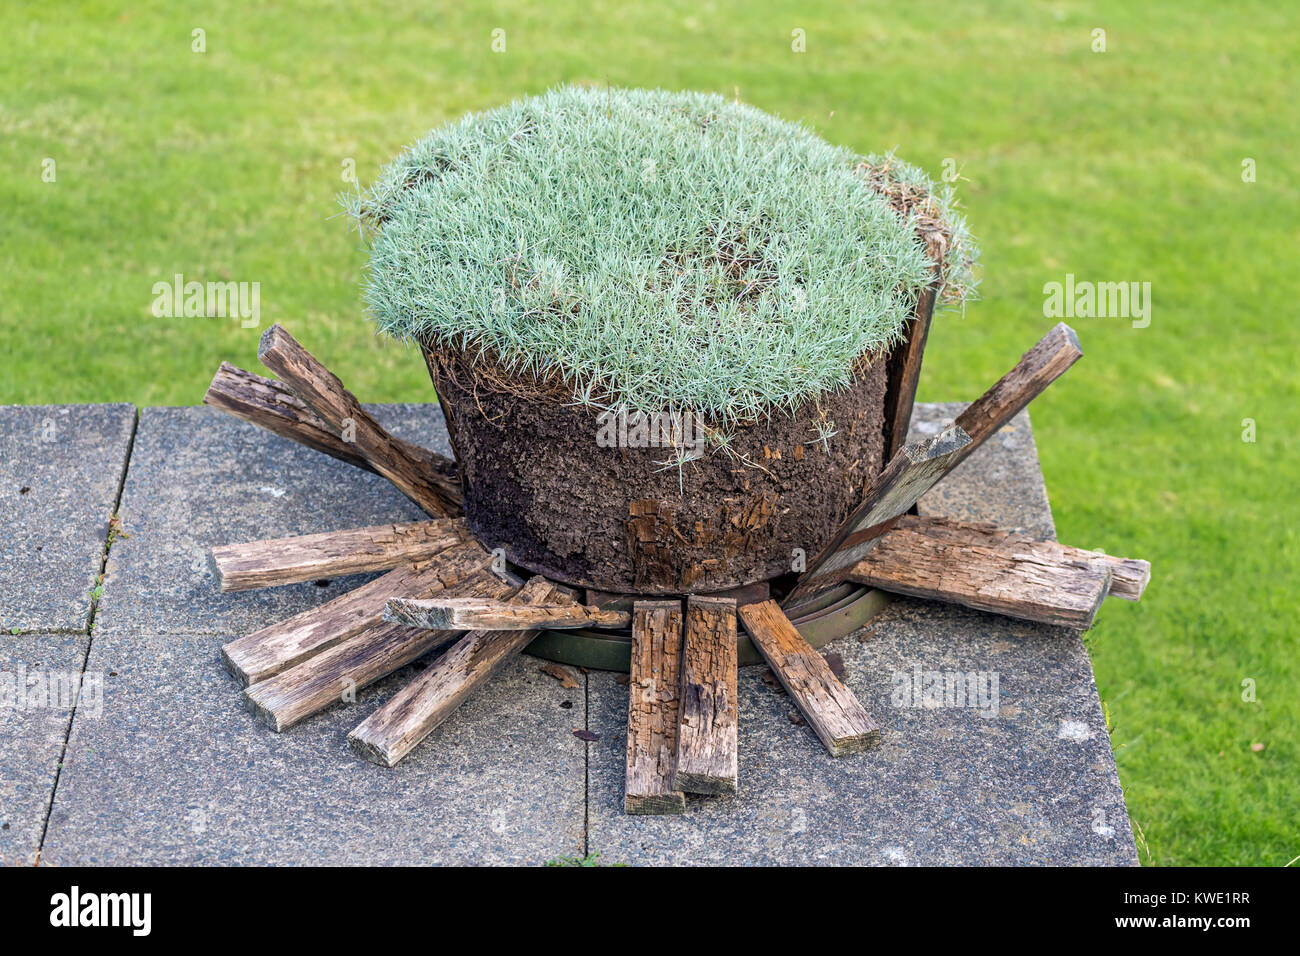 A dried out barrel used as a plant tub, UK Stock Photo